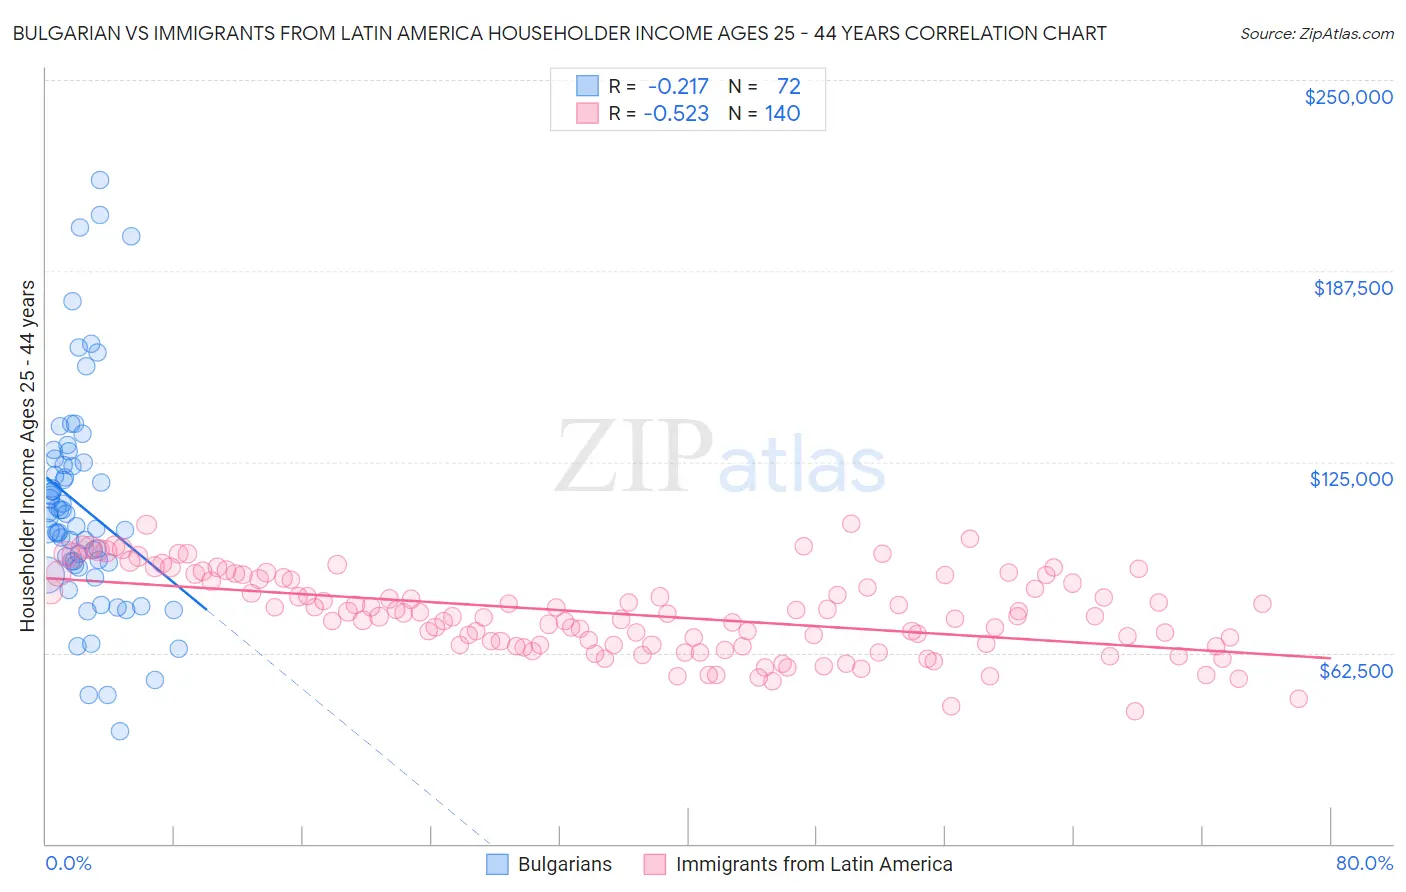 Bulgarian vs Immigrants from Latin America Householder Income Ages 25 - 44 years